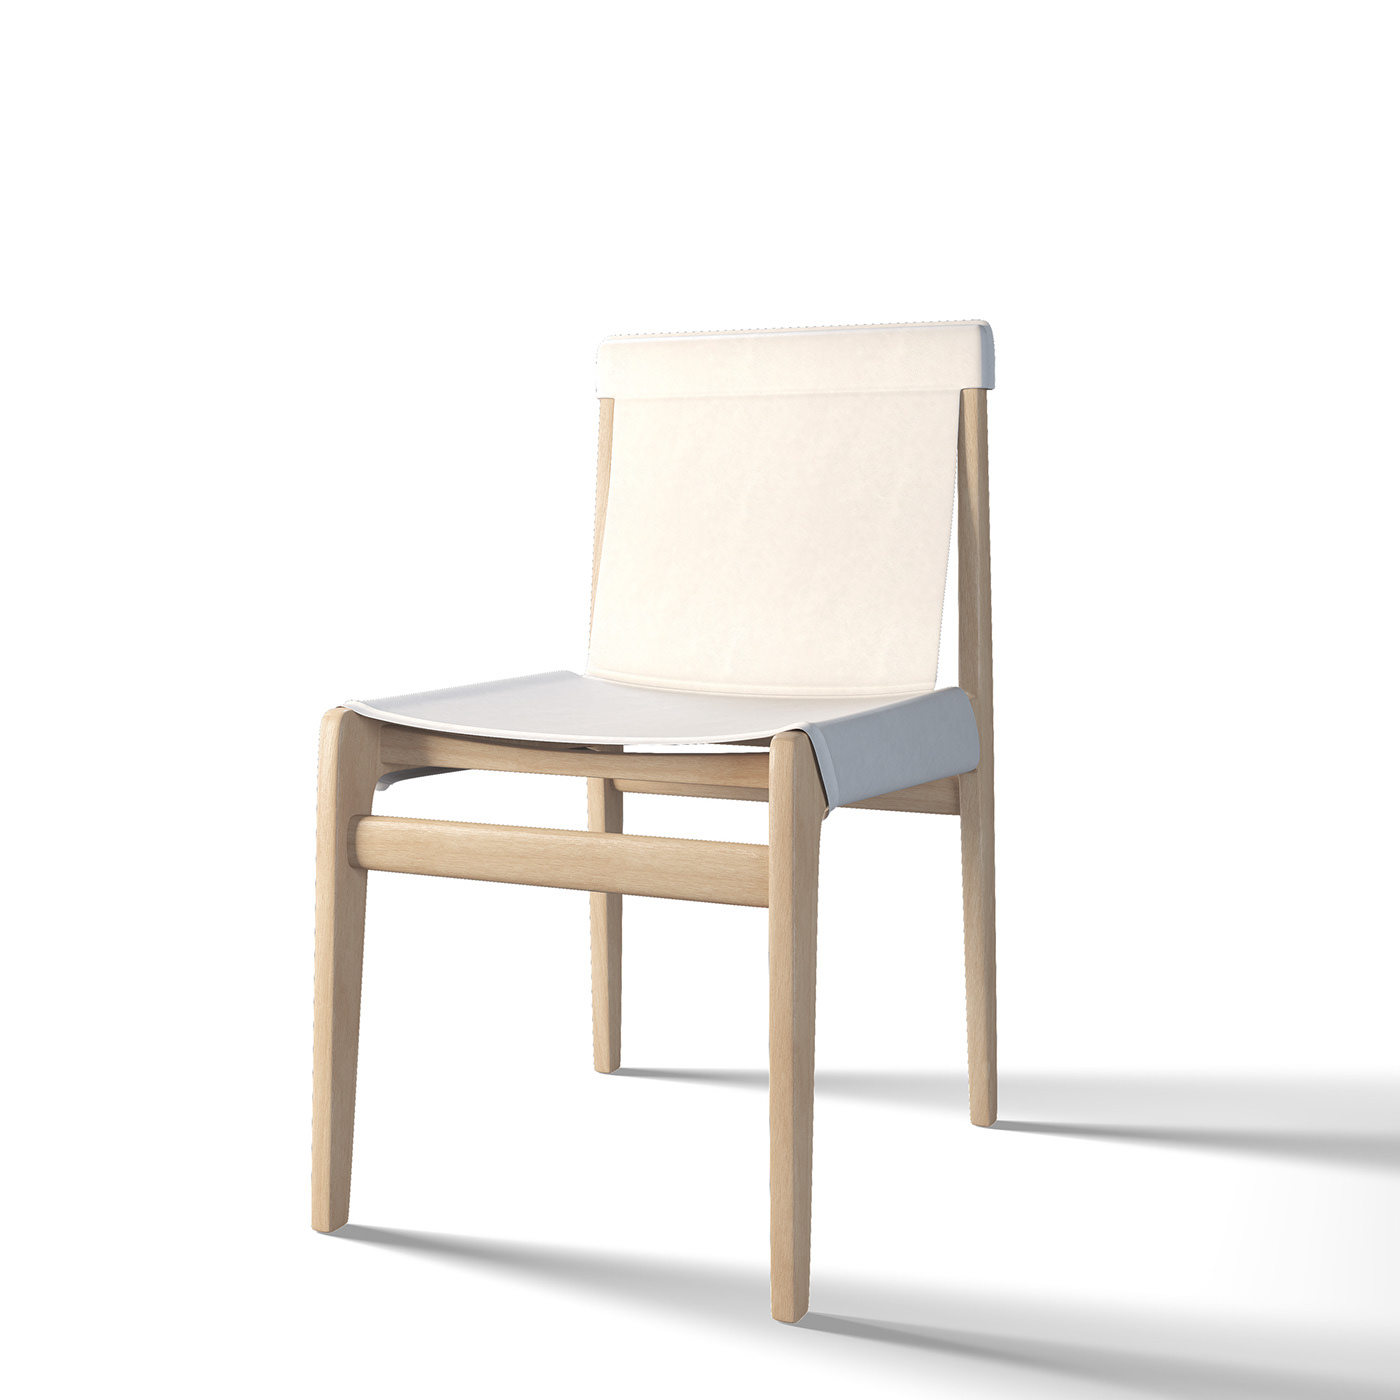 chair 3d modeling Render 3ds max vray visualization furniture interior design  product design  3D